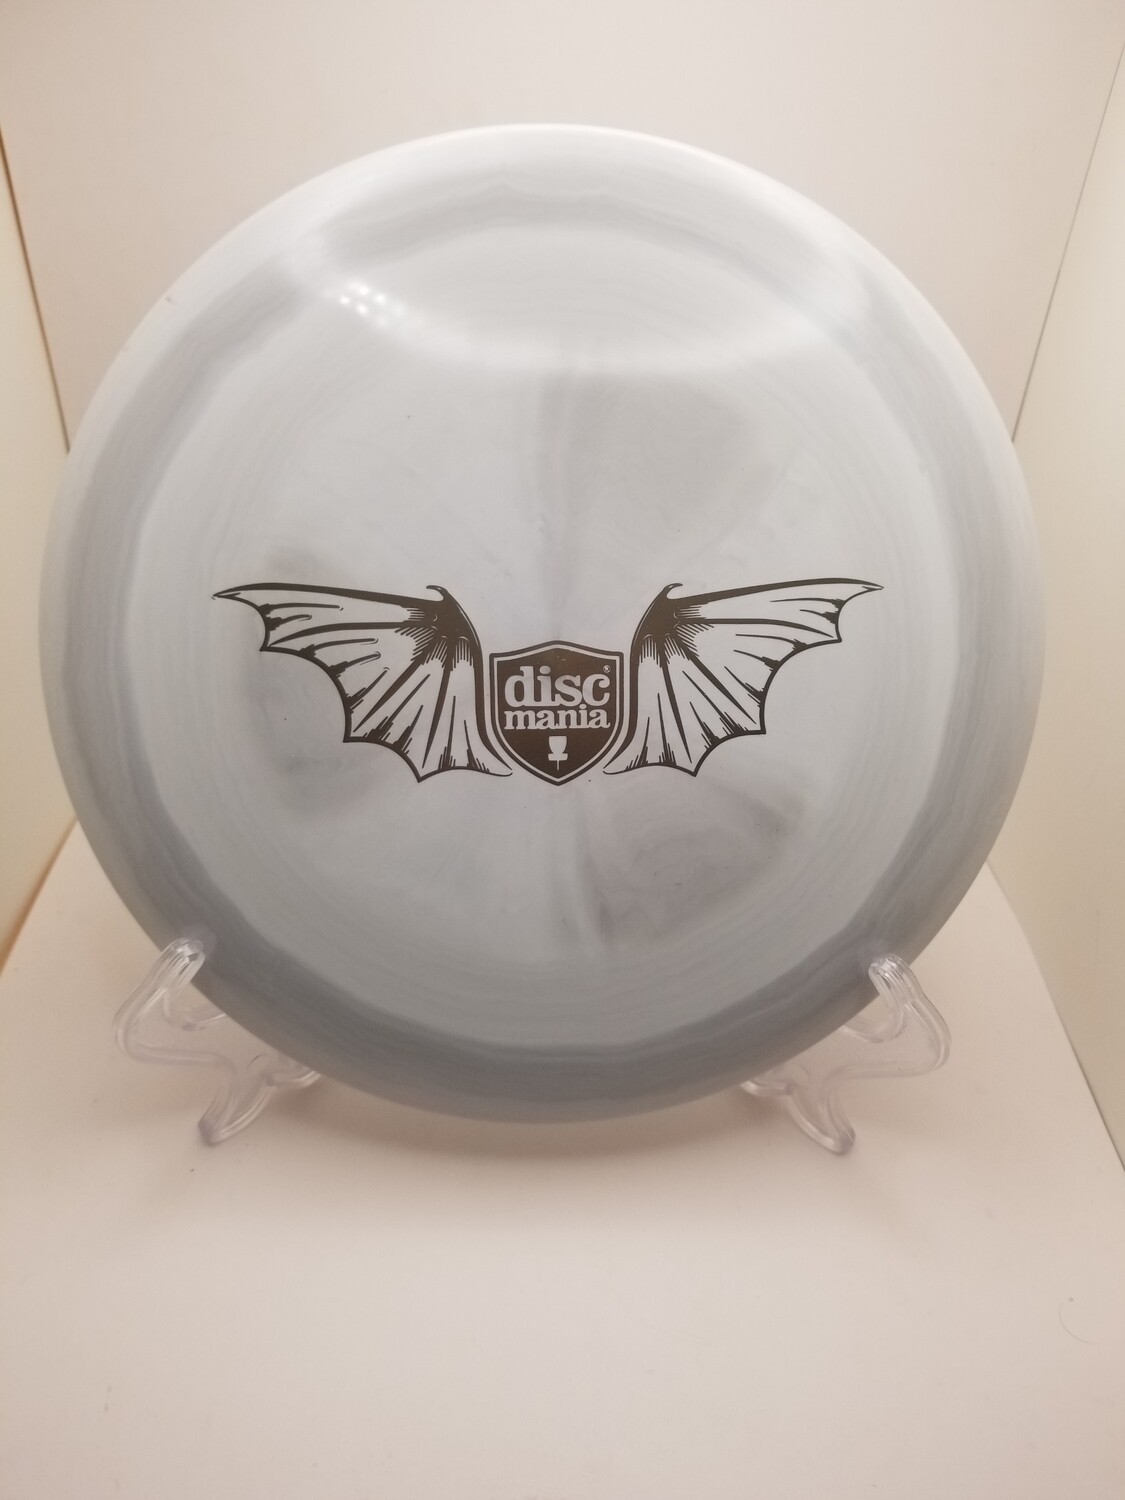 Discmania Discs Wings Swirl S Line MD1 – Limited Edition 177g